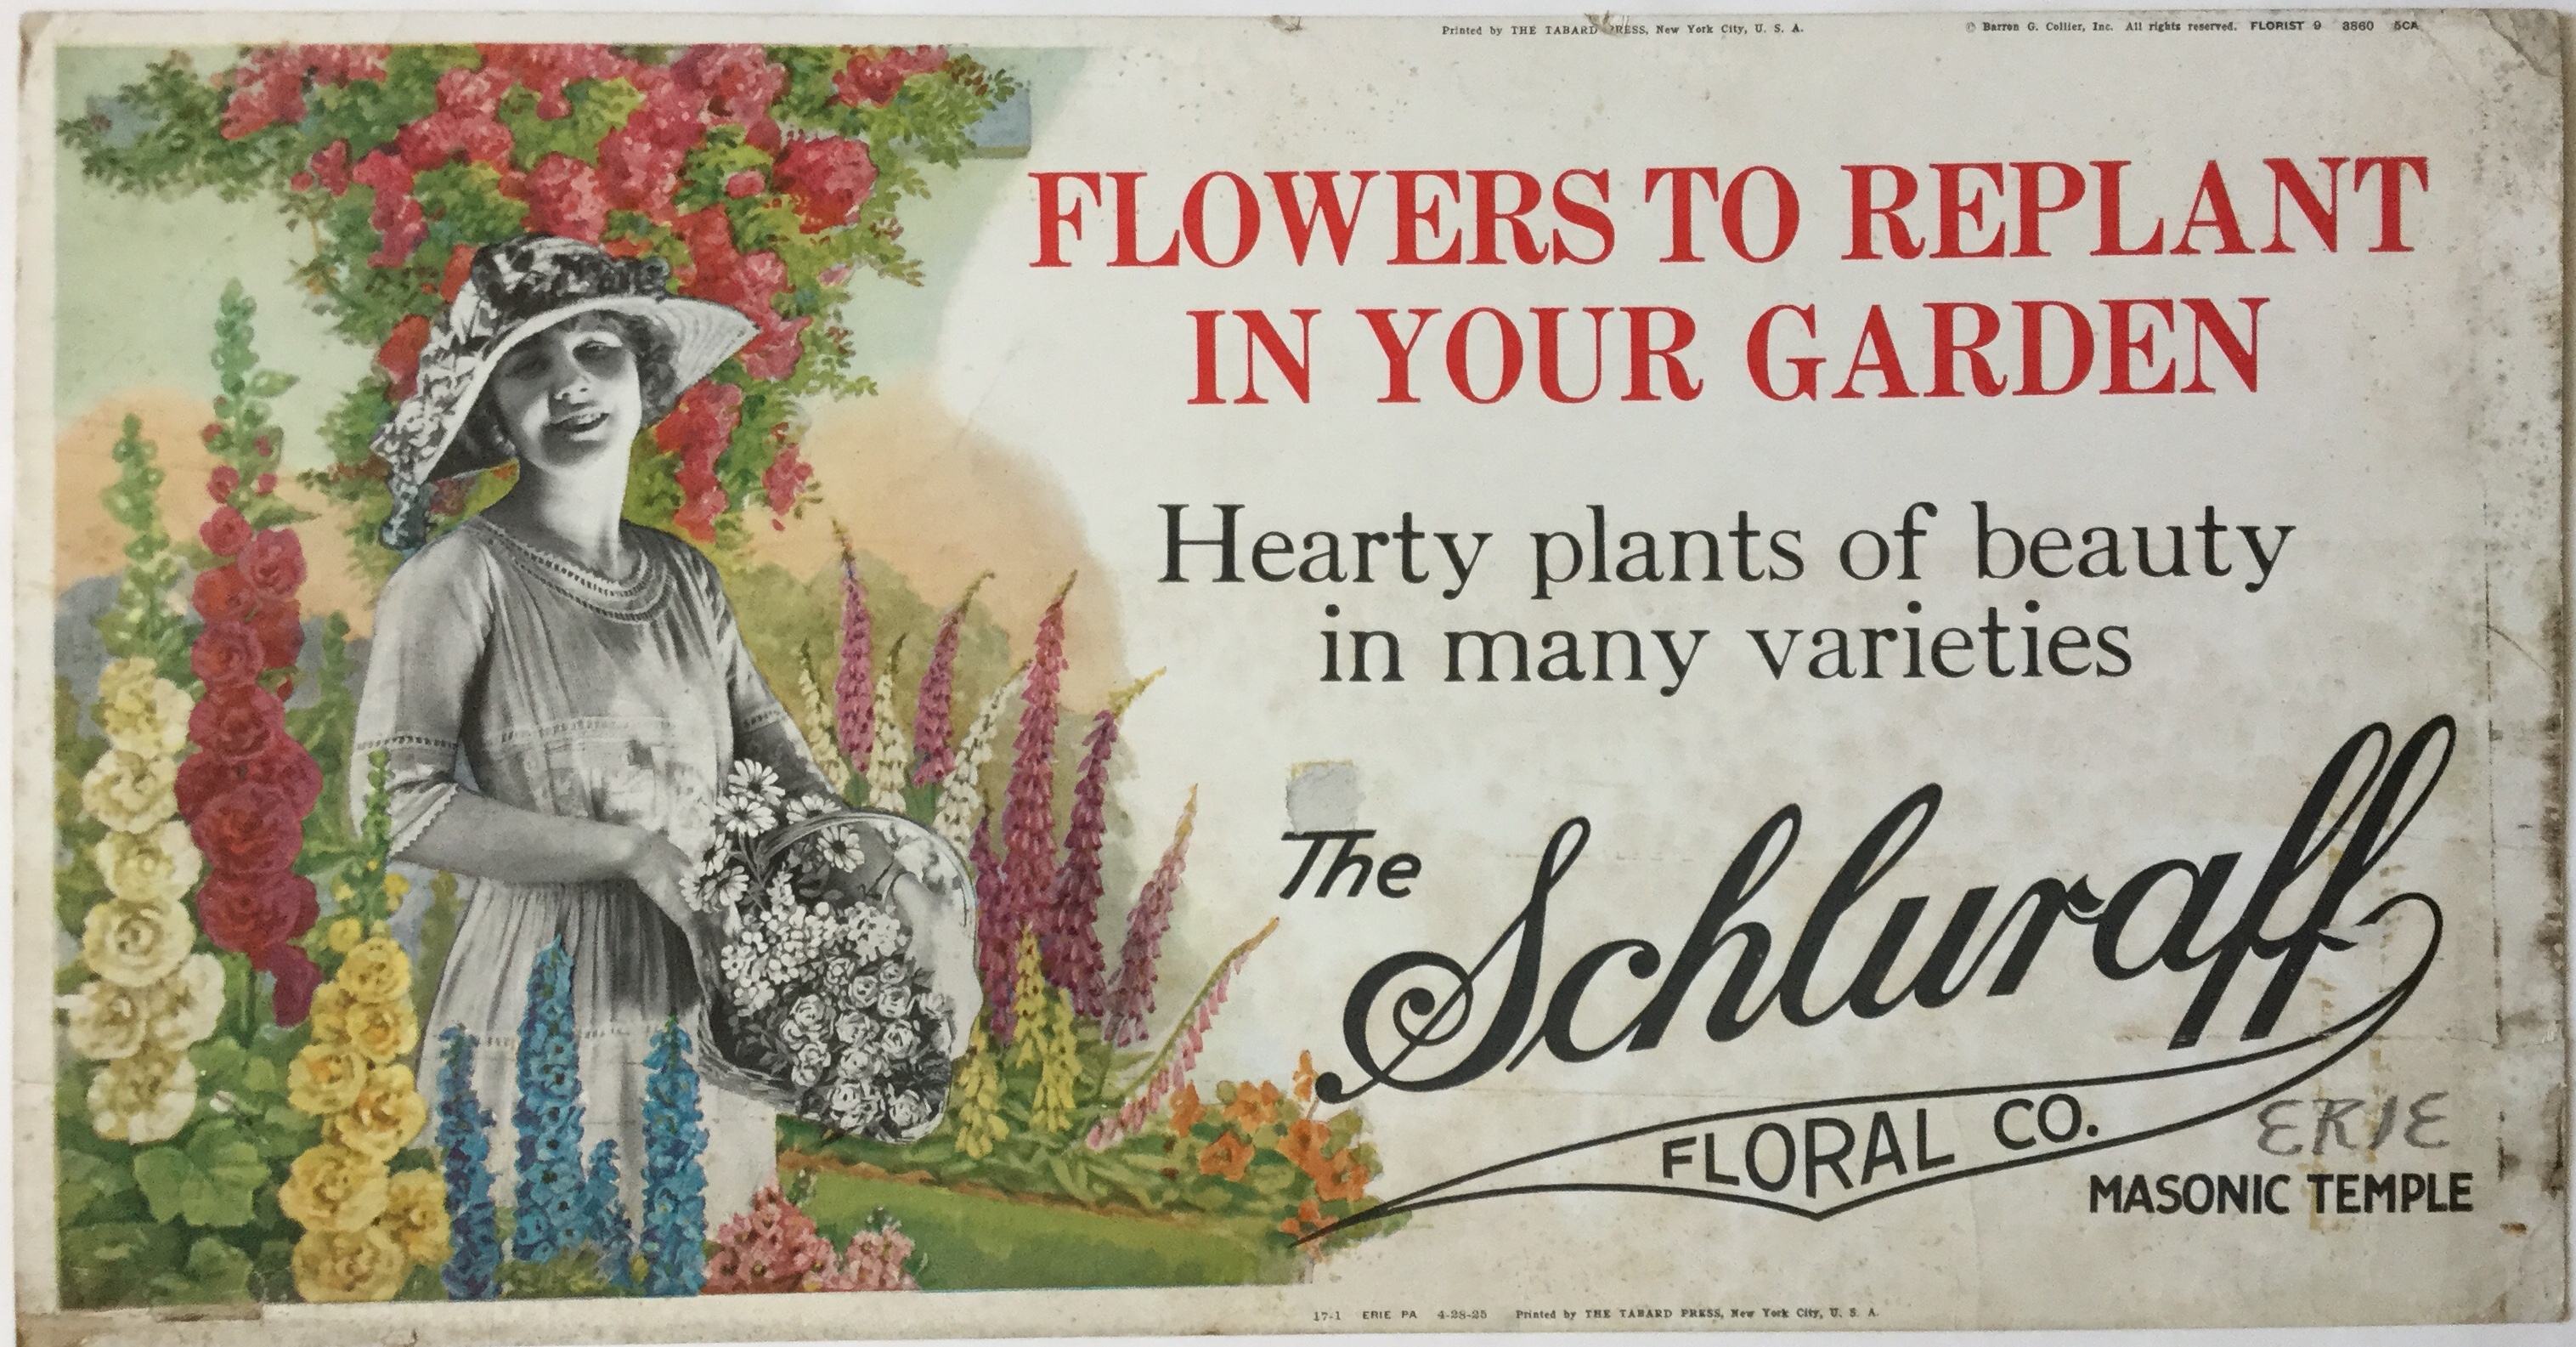 J394	FLOWERS TO REPLANT IN YOUR GARDEN - HARDY PLANTS OF BEAUTY IN MANY VARIETIES - SCHLURAFF FLORAL CO.